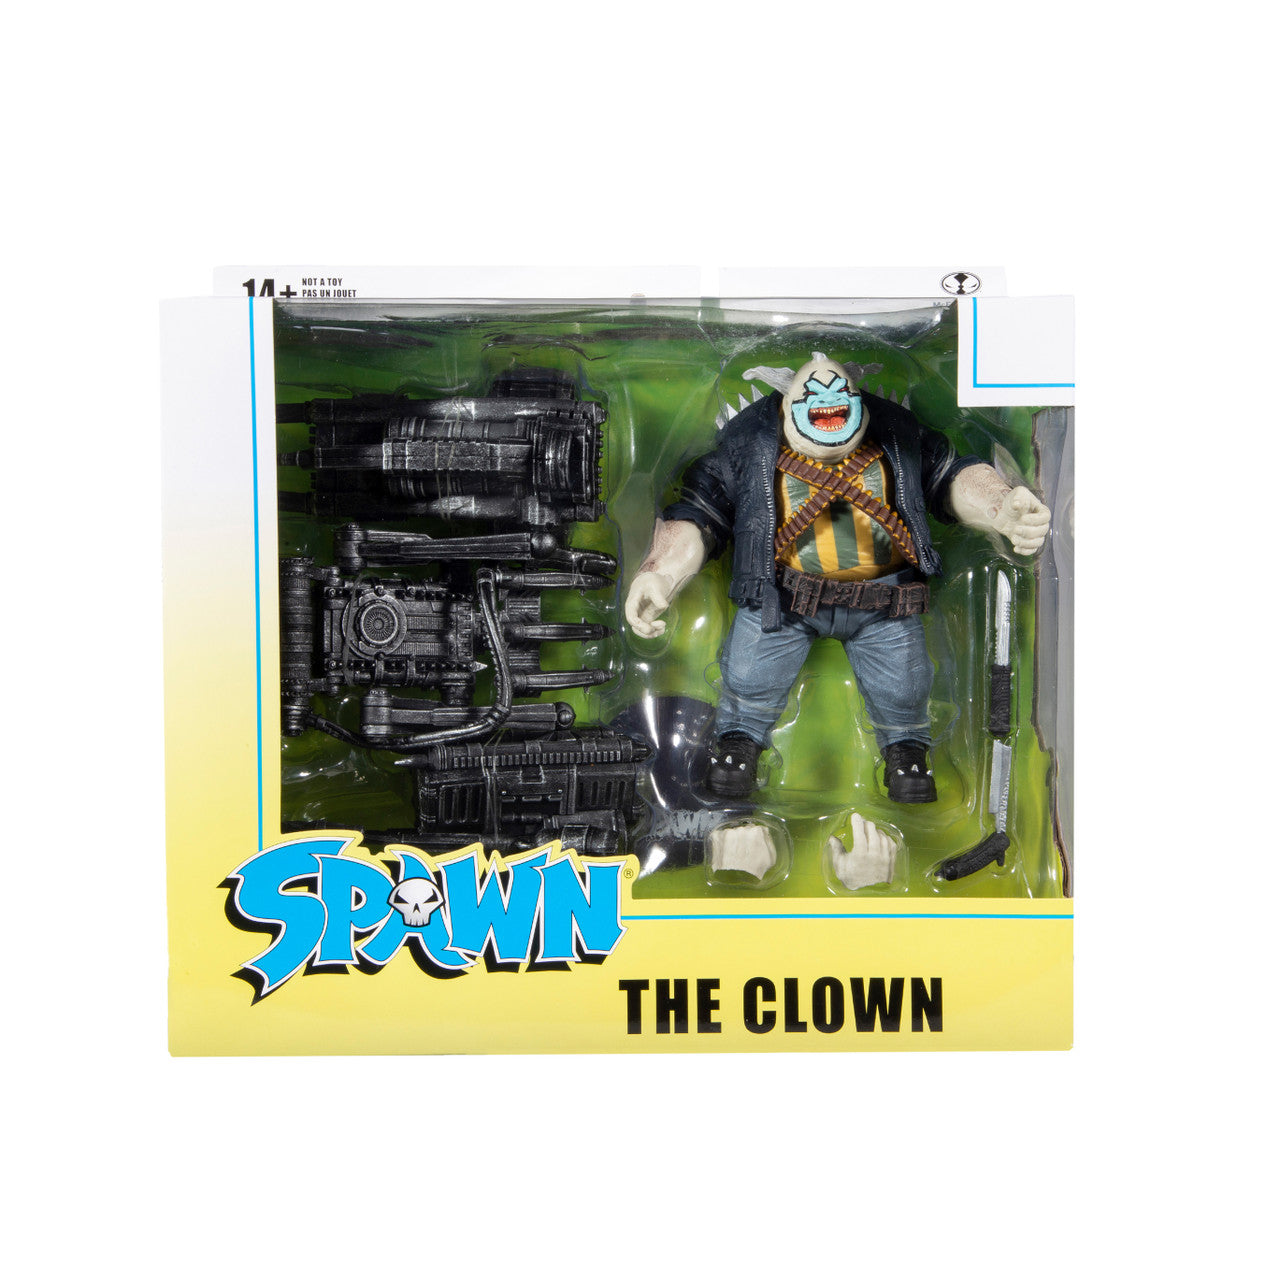 The Clown (Spawn) Deluxe Set 7" Figure By Mcfarlane